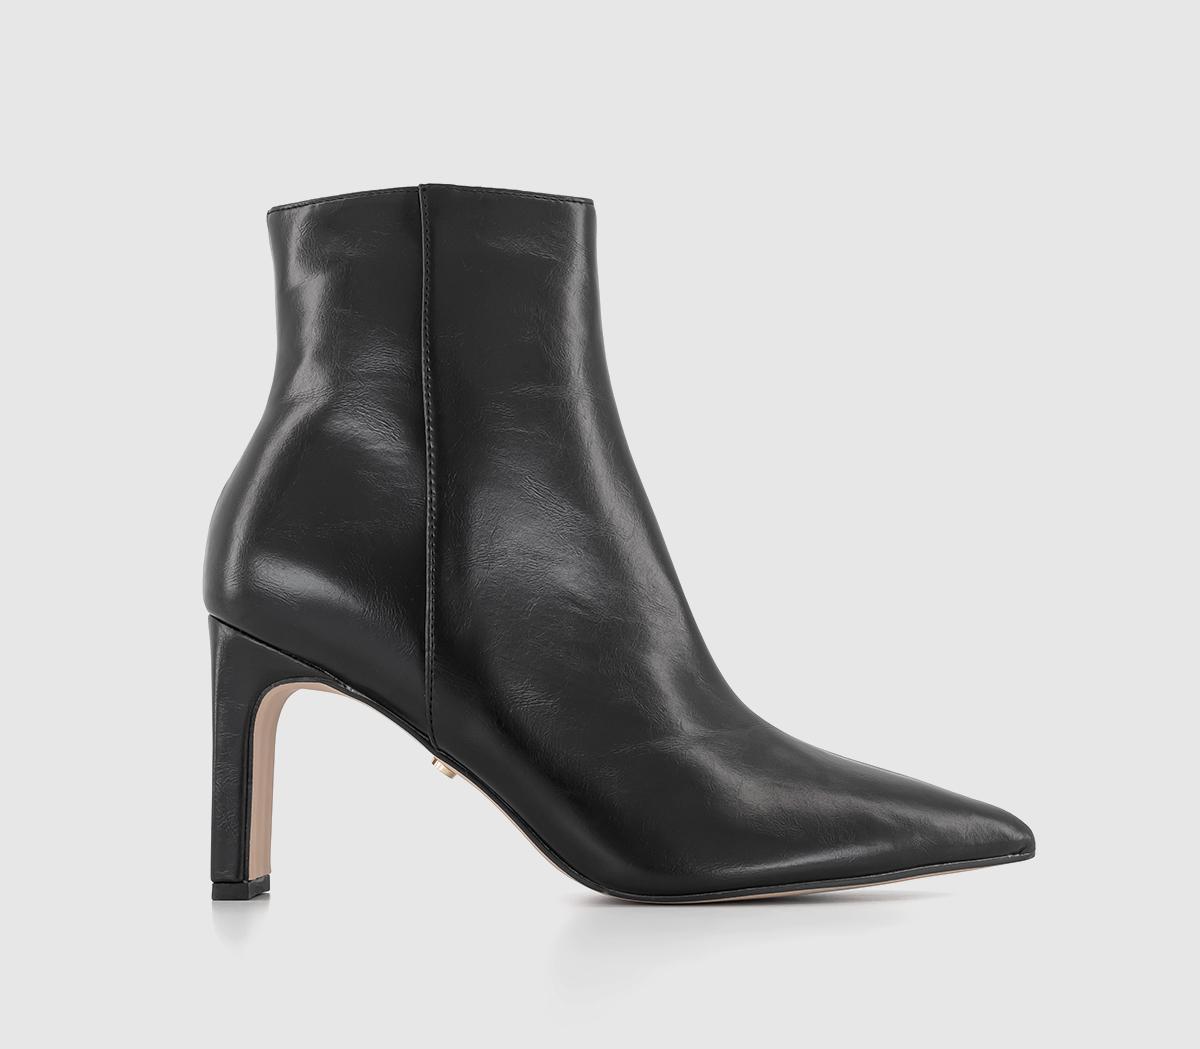 OFFICE Adele Slim Heel Ankle Boots Black - Women's Ankle Boots